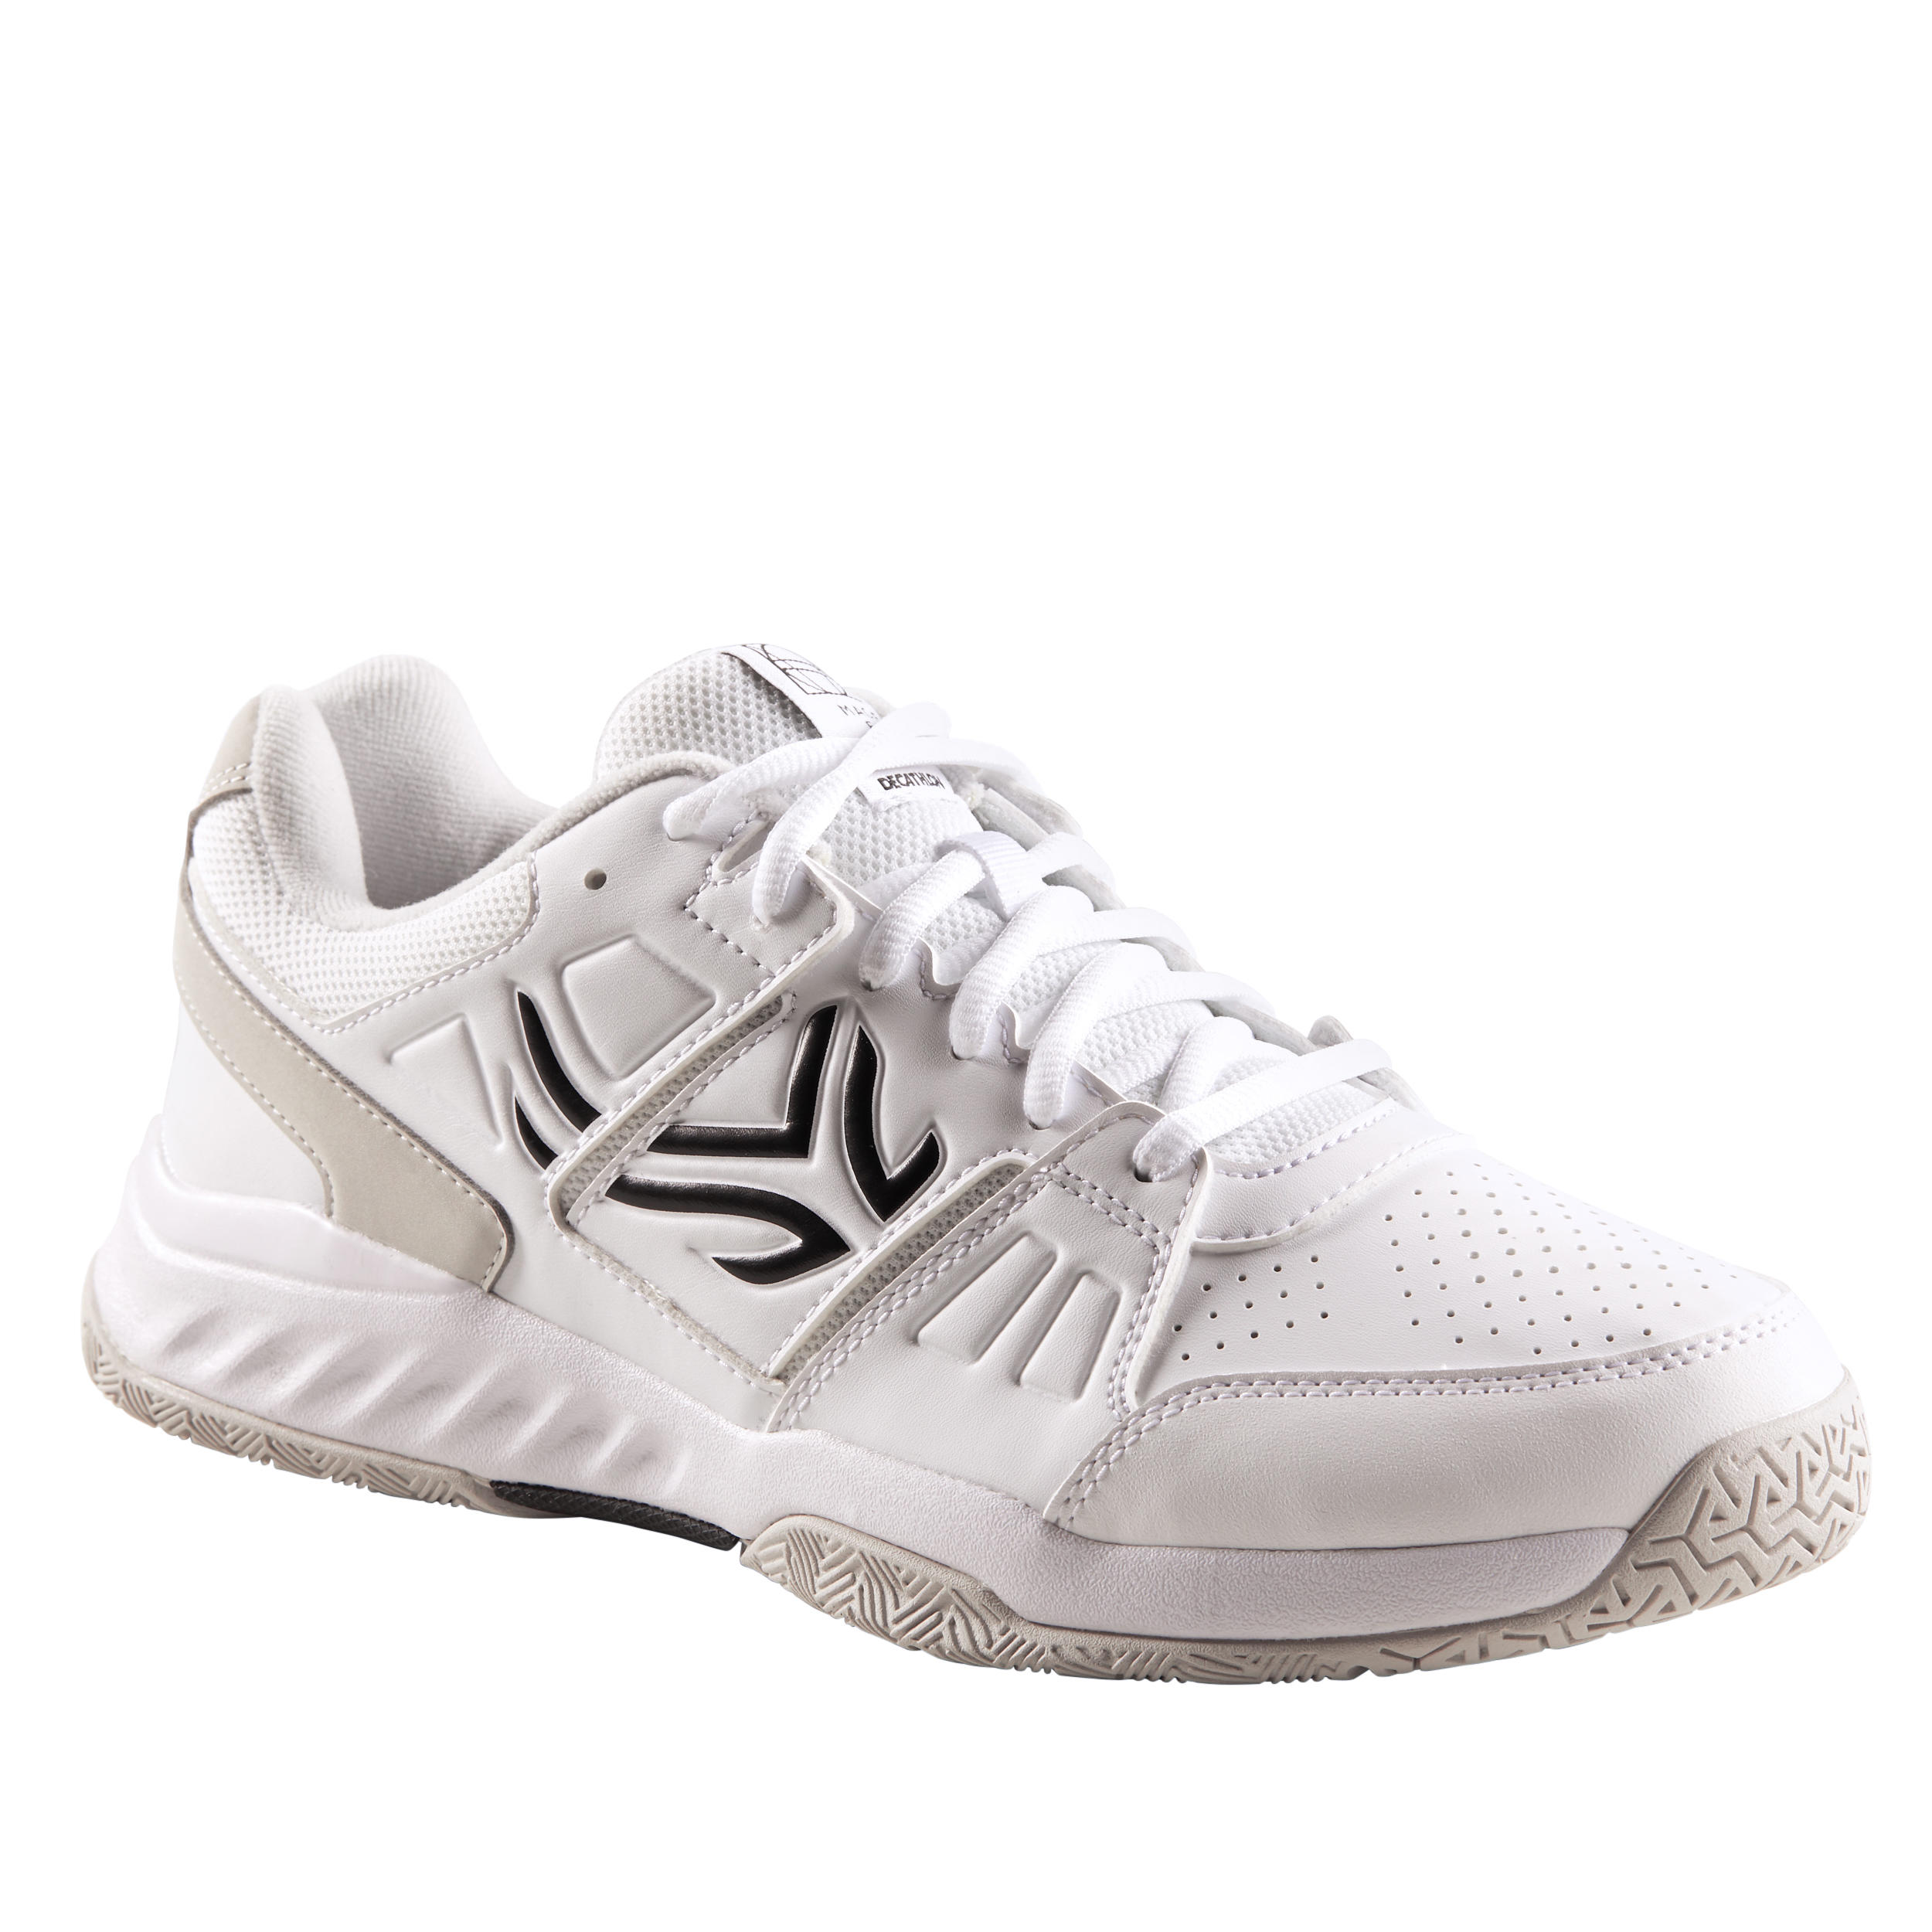 white sole tennis shoes